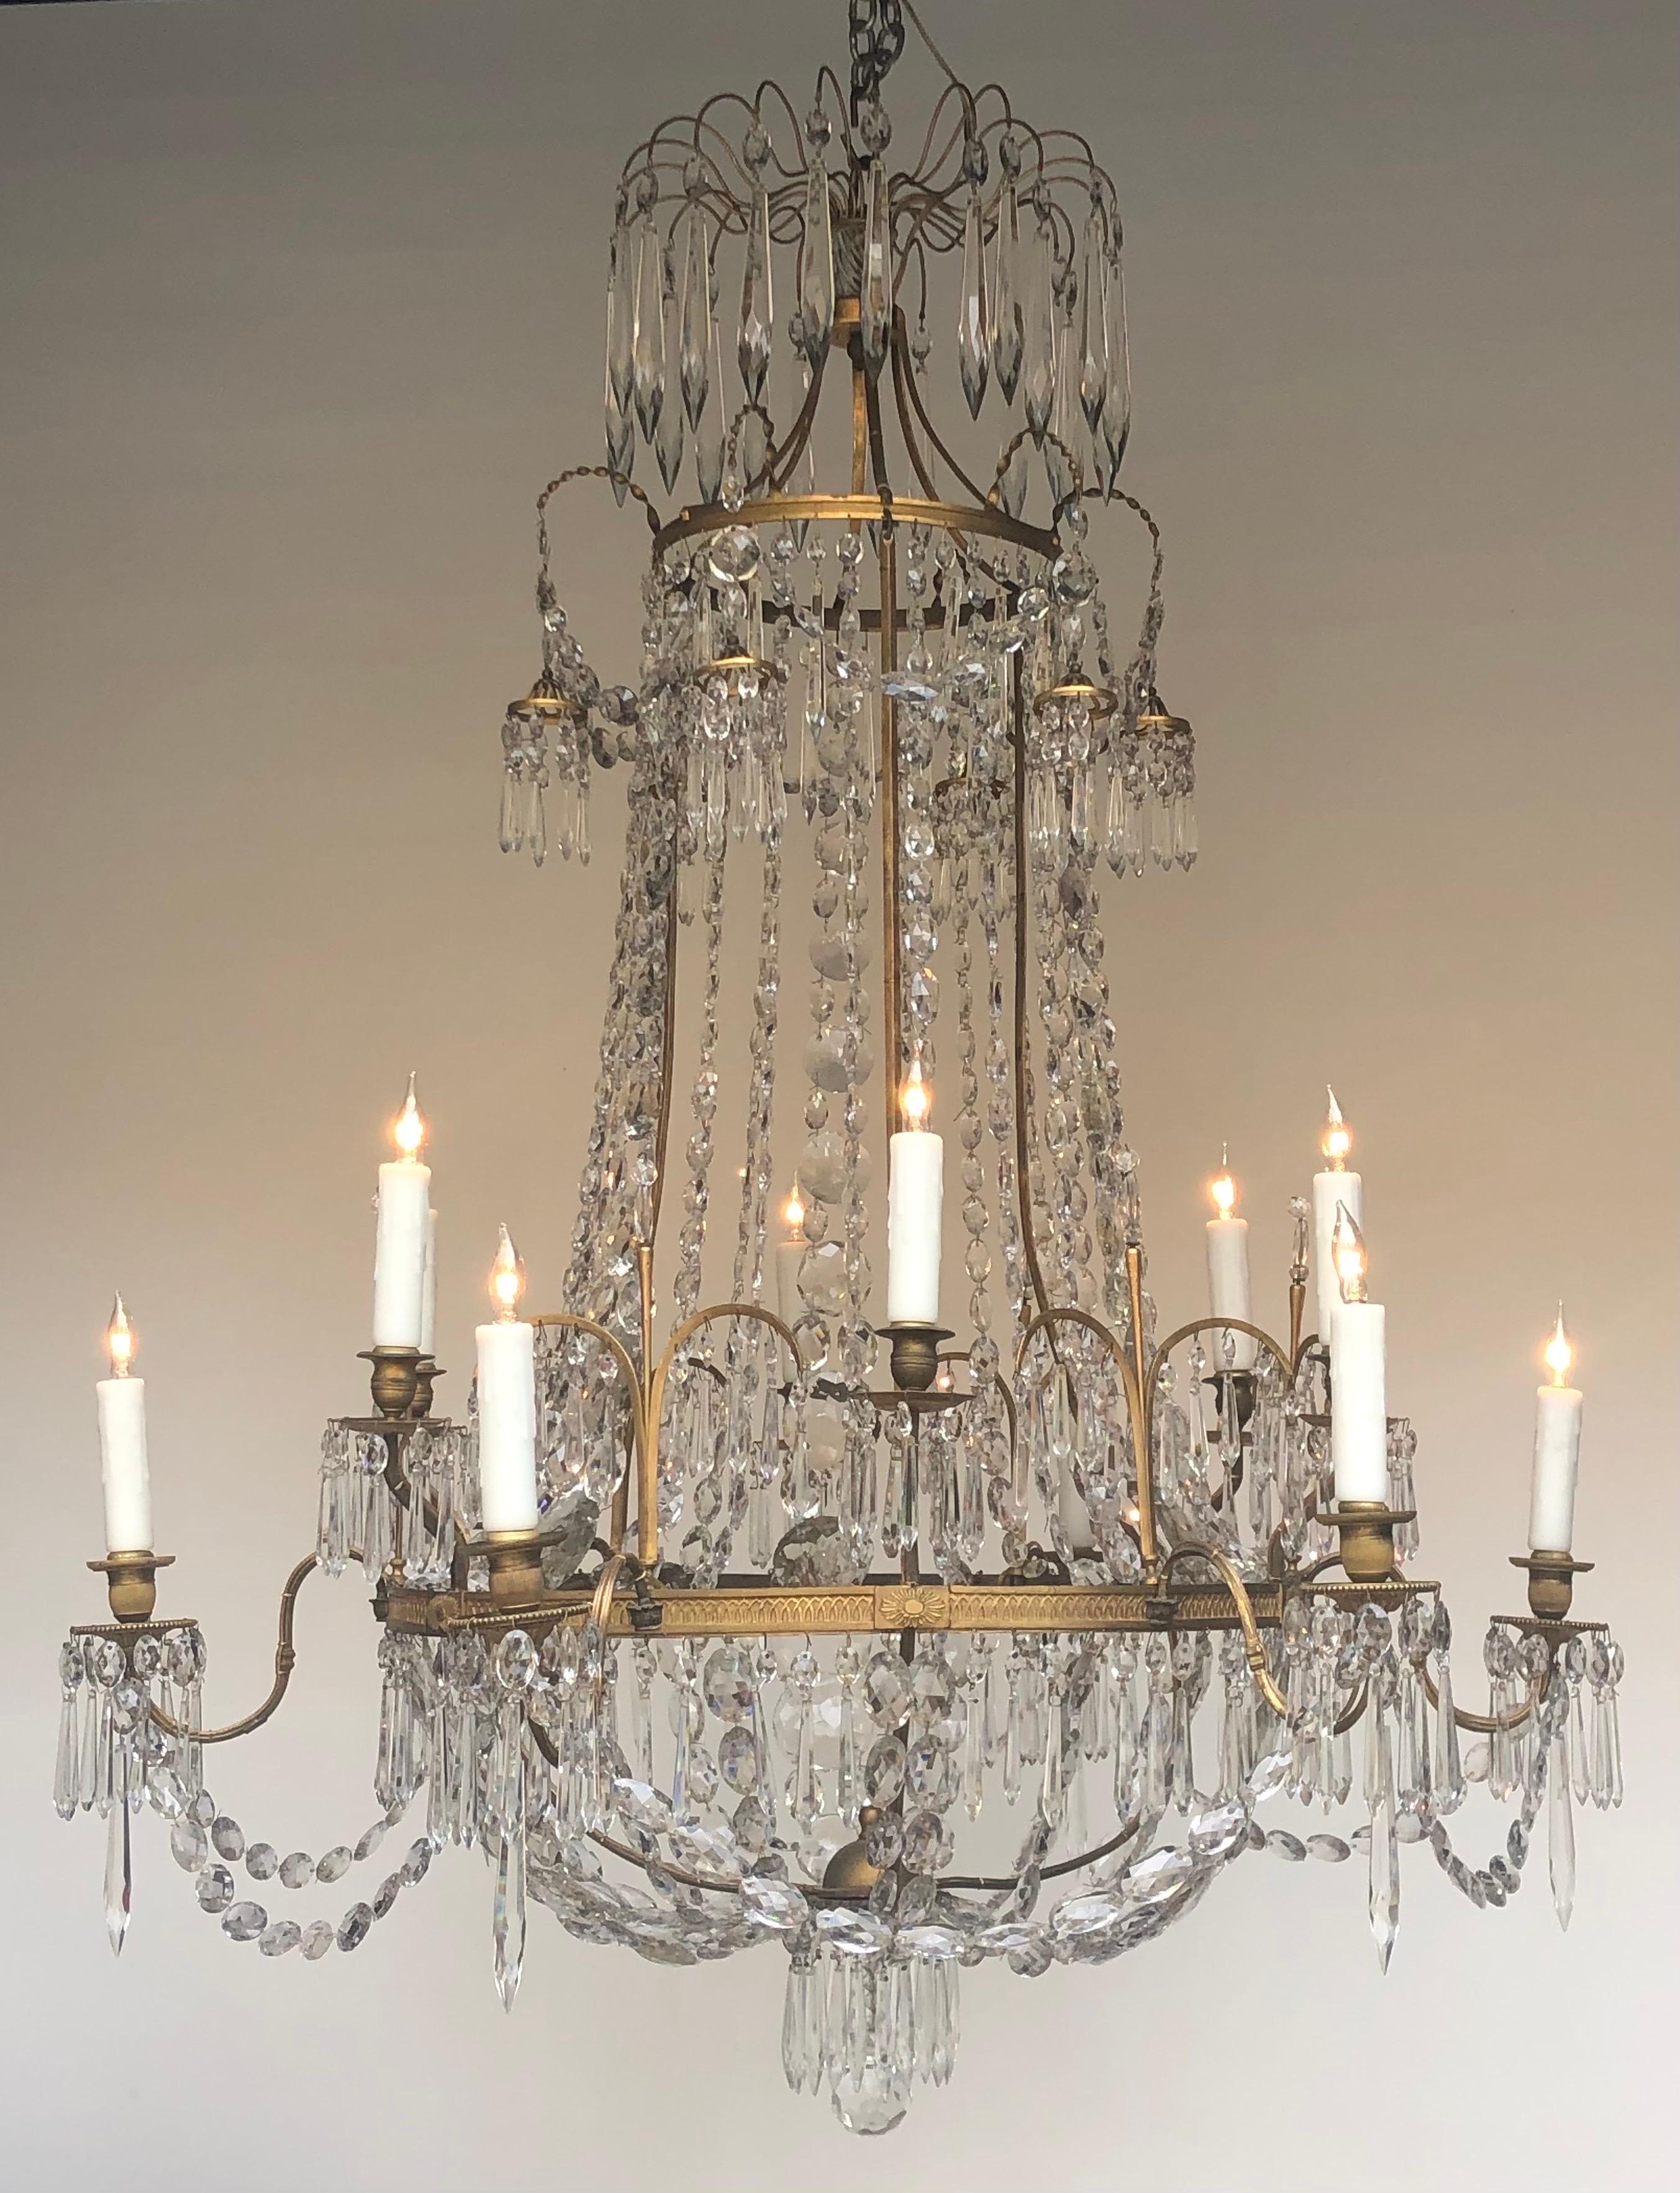 This Grand Elegant Regency Tent-&-Basket Twelve Candle Chandelier was designed and made in England in the early Nineteenth Century.  This Regency Period Chandelier has an elegant classical design. The Regency Tent-&-Basket Candle Chandelier has a